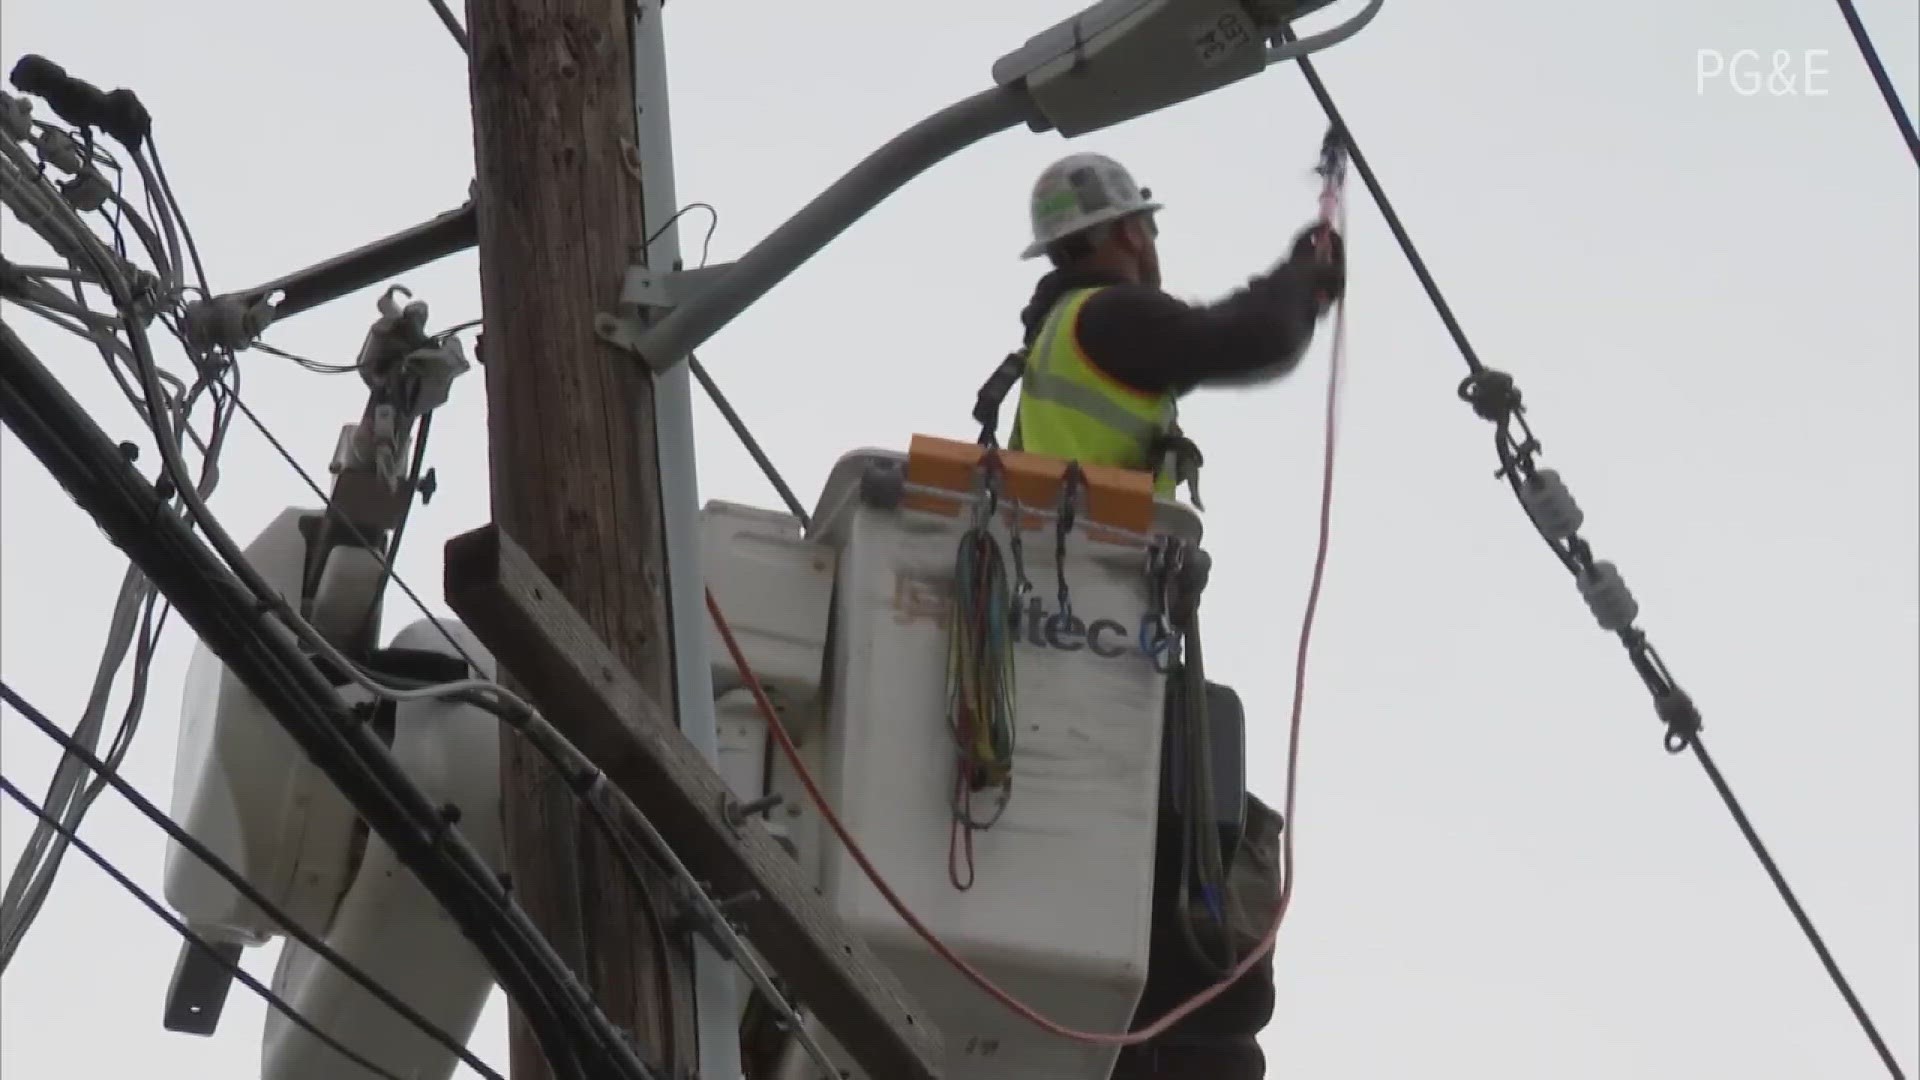 A summer heat wave has utility crews busy with several power outages across the region over the weekend.